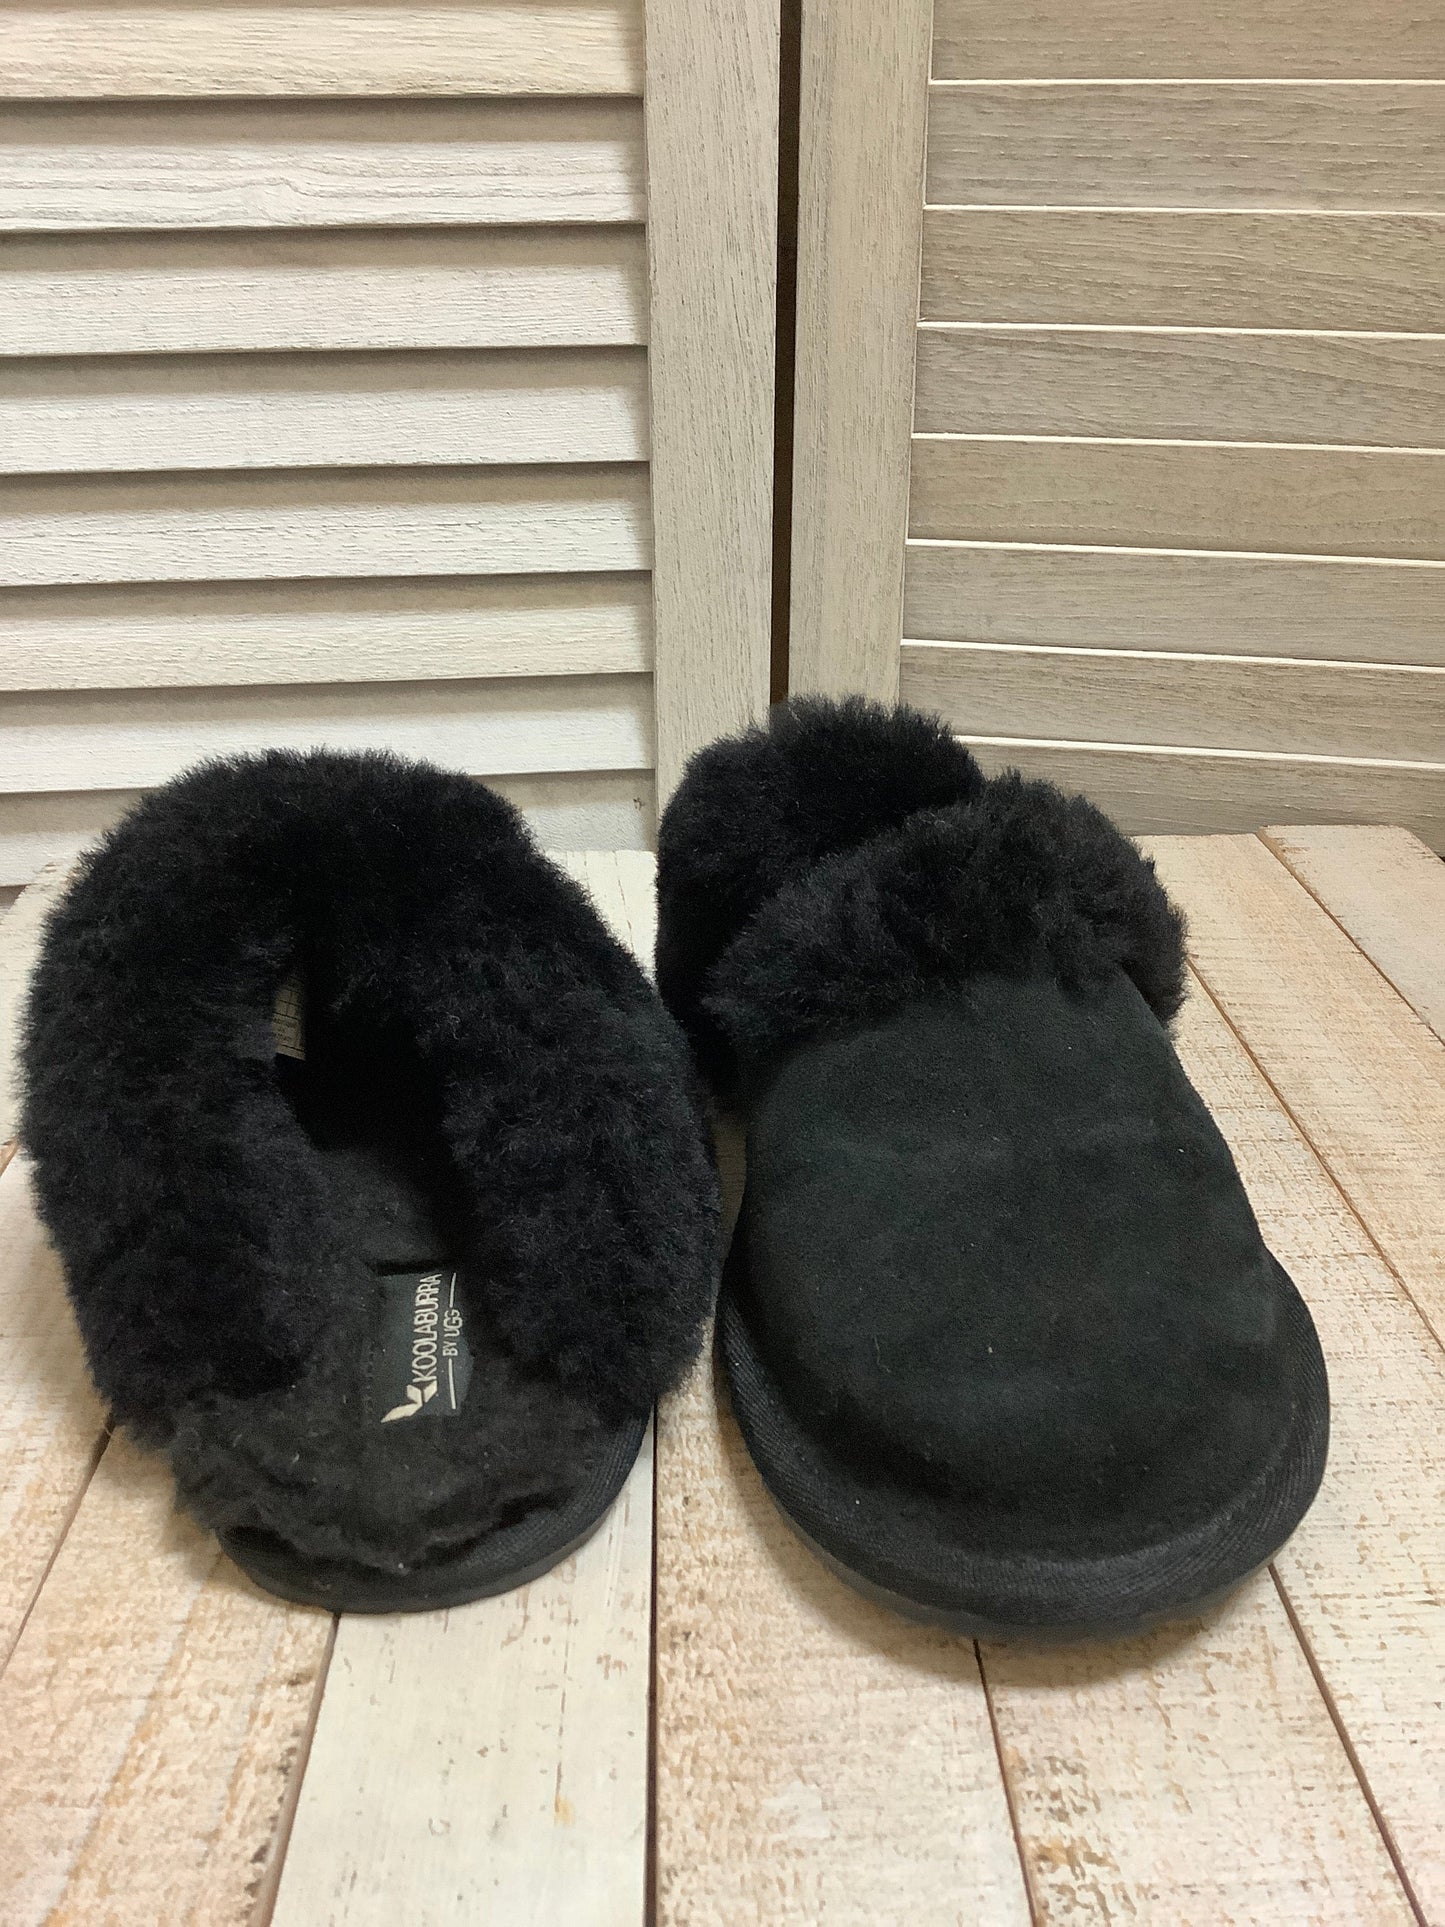 Shoes Flats Other By Koolaburra By Ugg  Size: 8